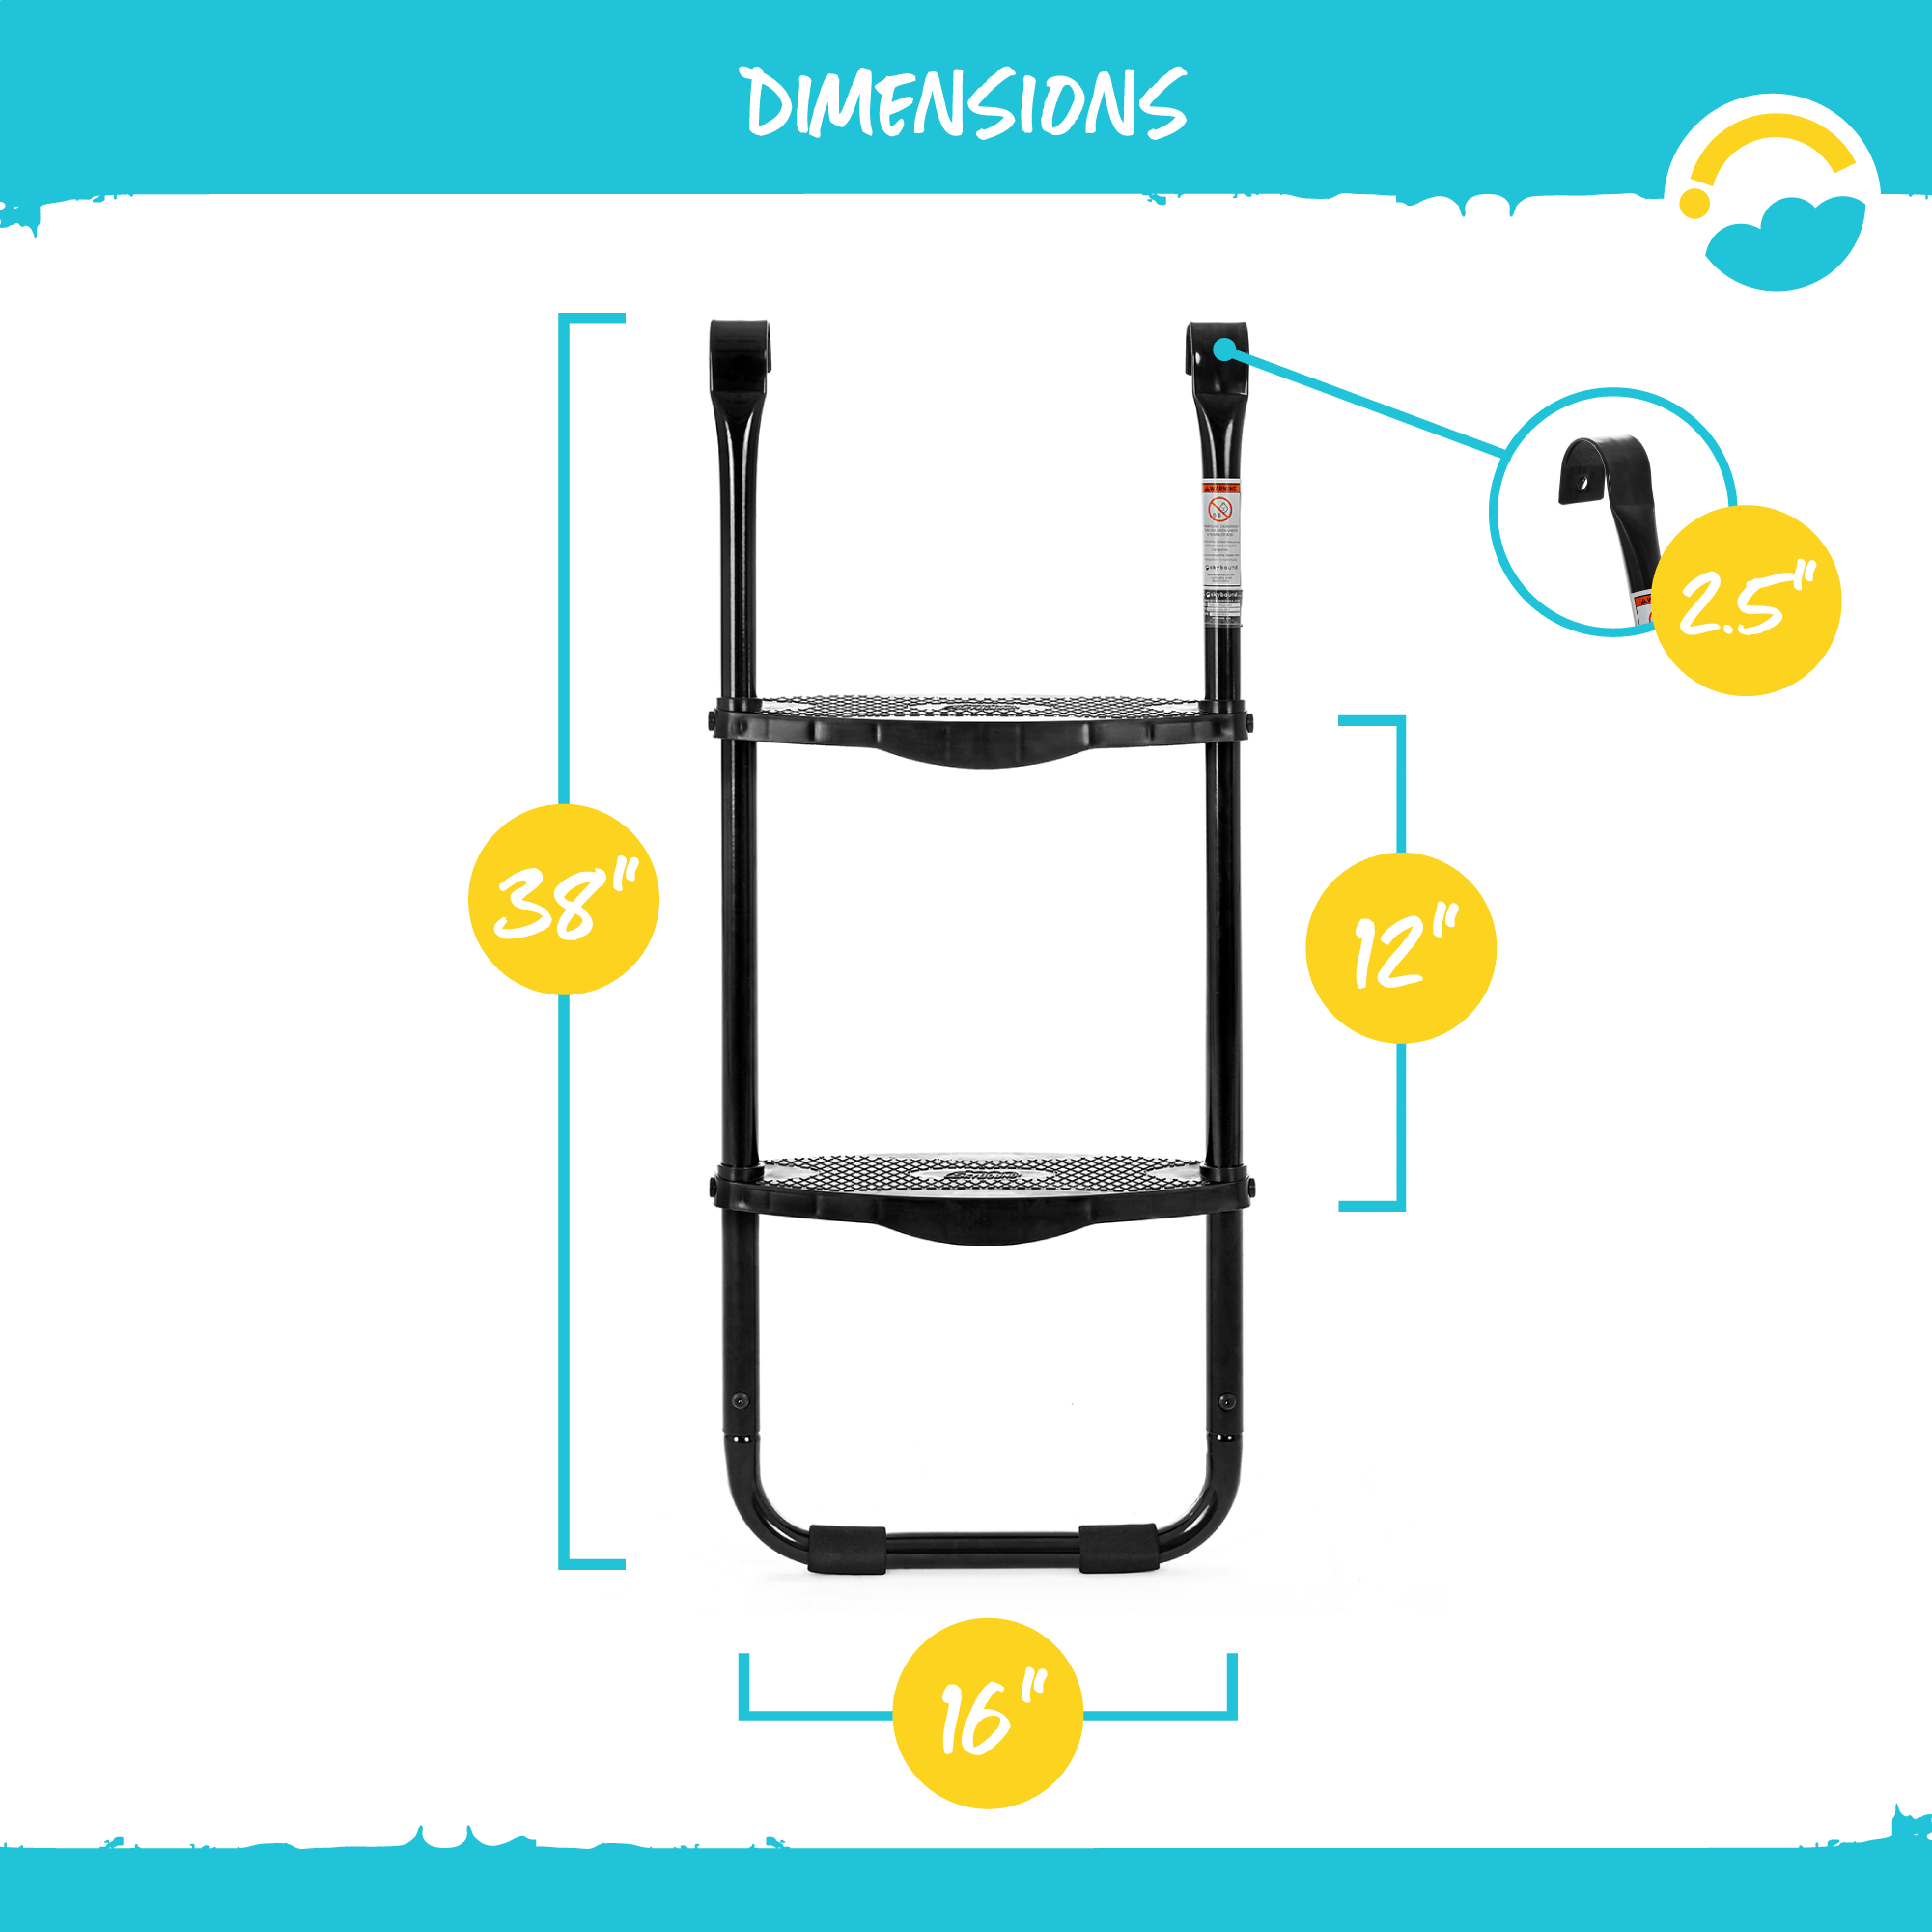 Dimensions of the Ladder: Total height is 38", width is 16", between each step is 12" and hook top is 2.5".